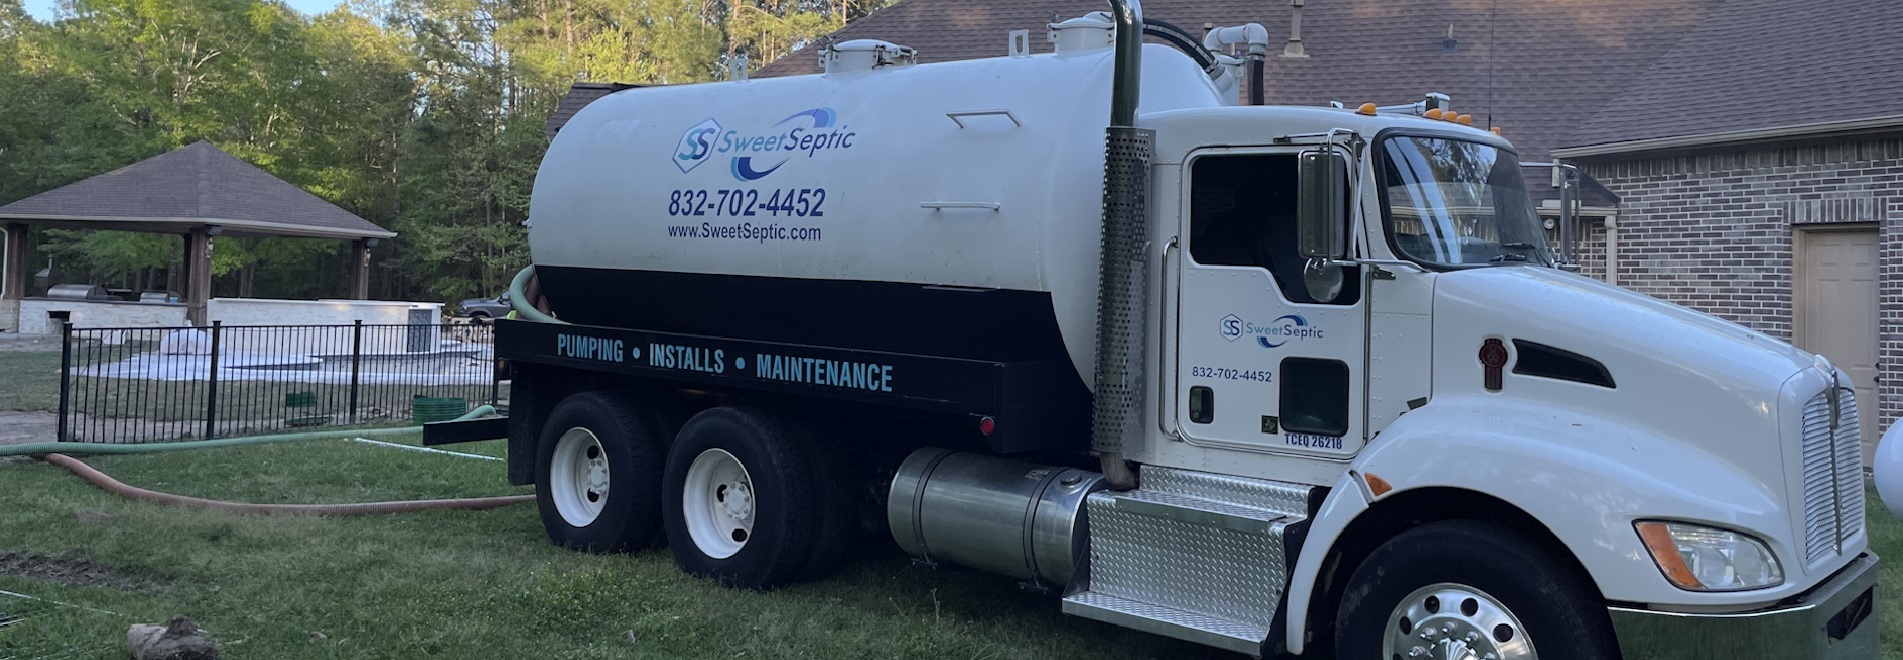 Sweet Septic Houston Texas. Septic Services in Houston. Septic Installation, Septic Repair, Drilling and Engineered Systems. General Contractor, General Construction, Drilling Contractor.  Competitive Pricing. General Contractor Houston Texas area.